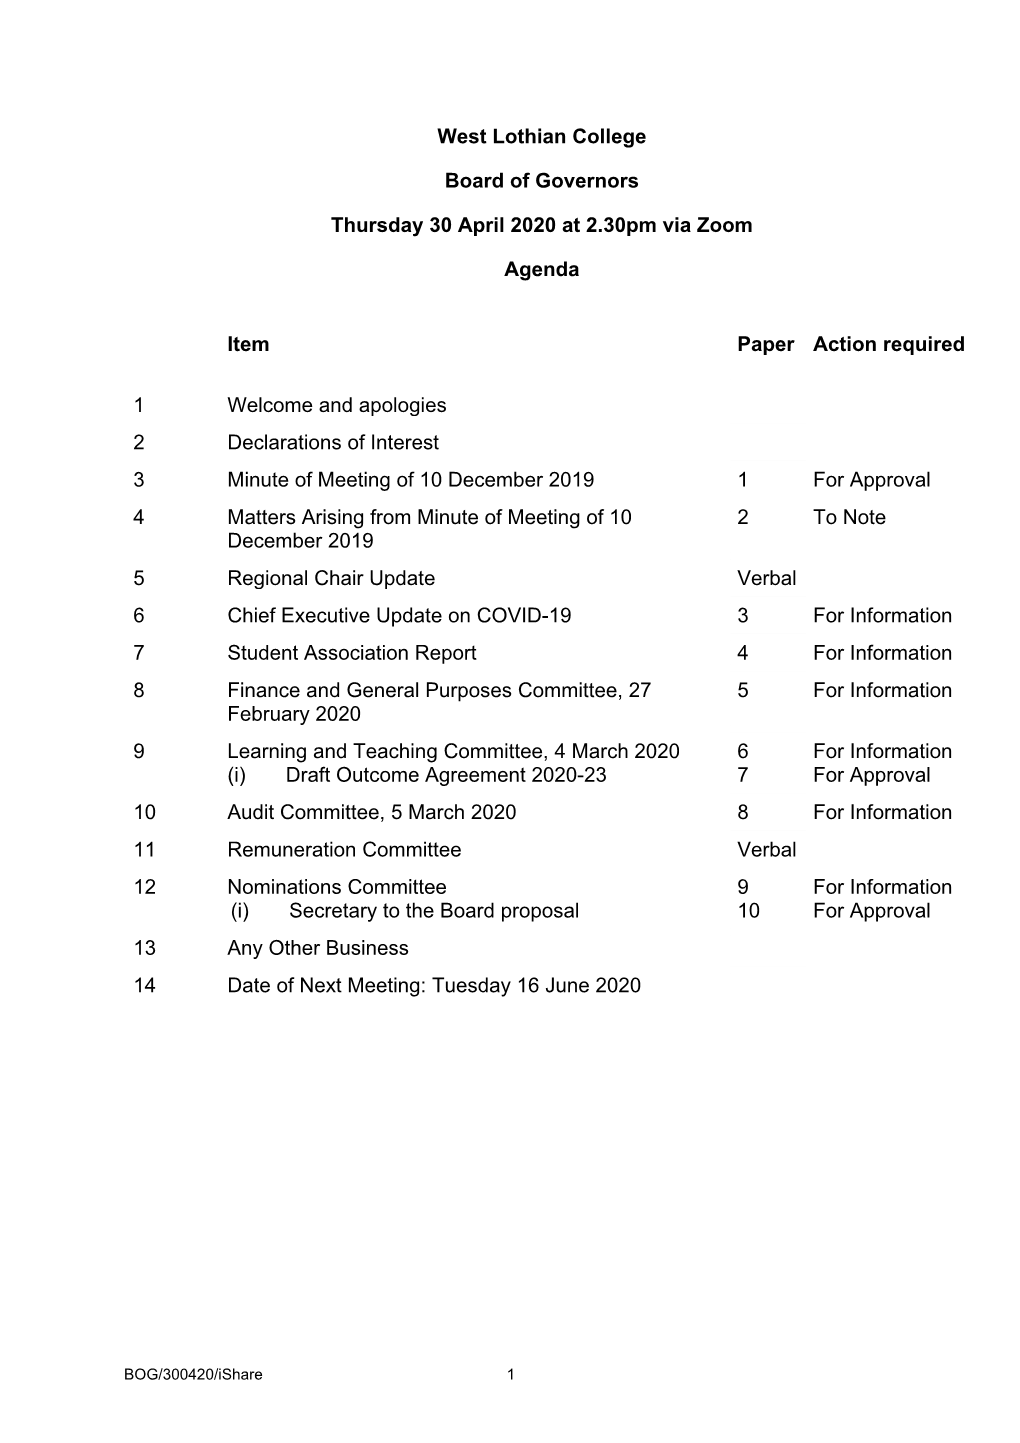 West Lothian College Board of Governors Thursday 30 April 2020